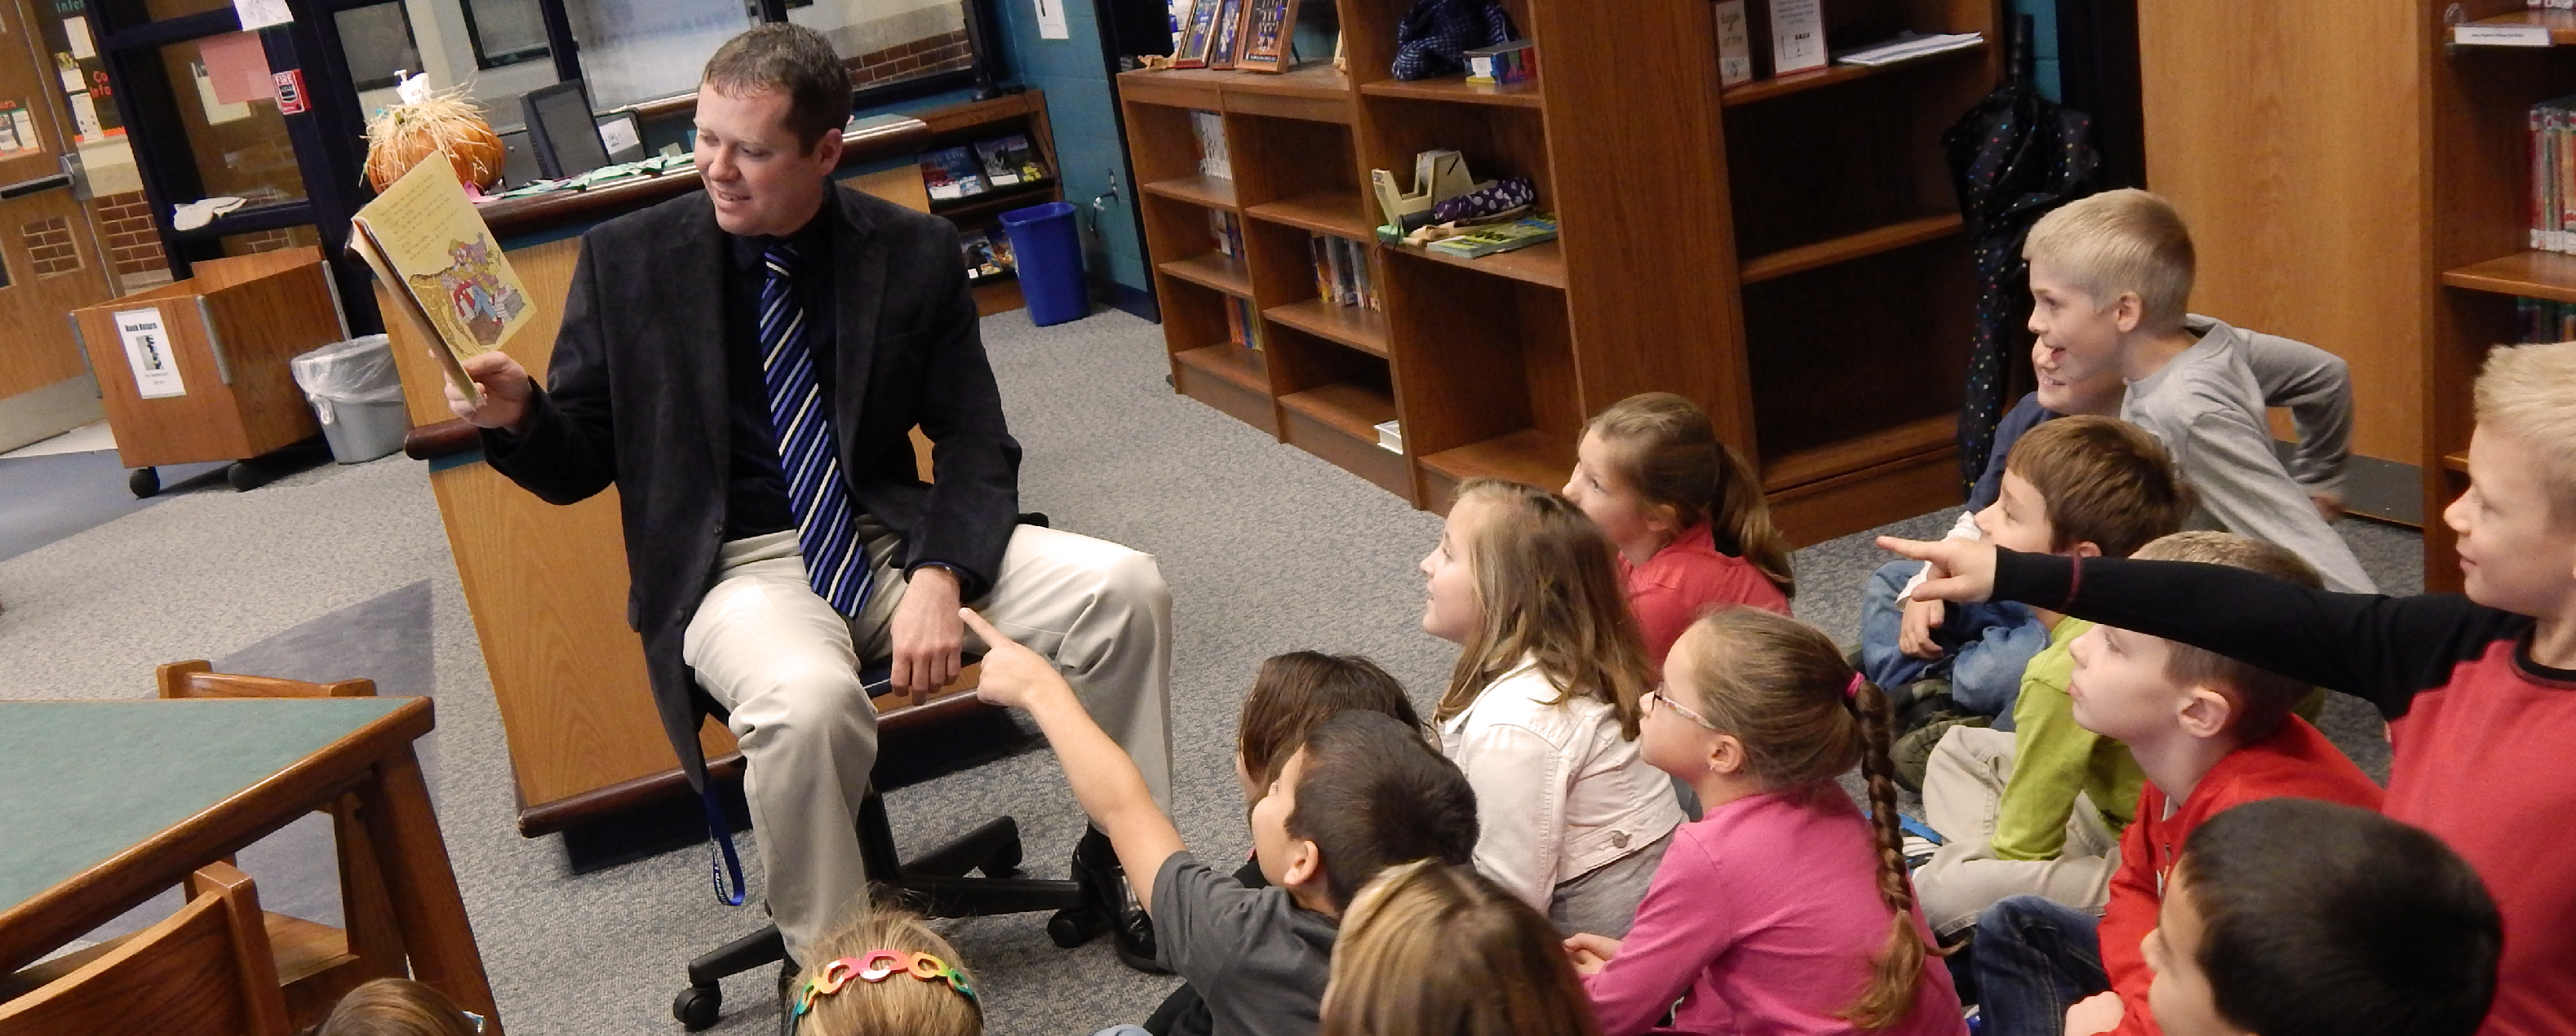 Man in business attire sitting on a chair with a book in front of a row of children who are pointing at the book and watching him share the book with excited expressions on their faces.